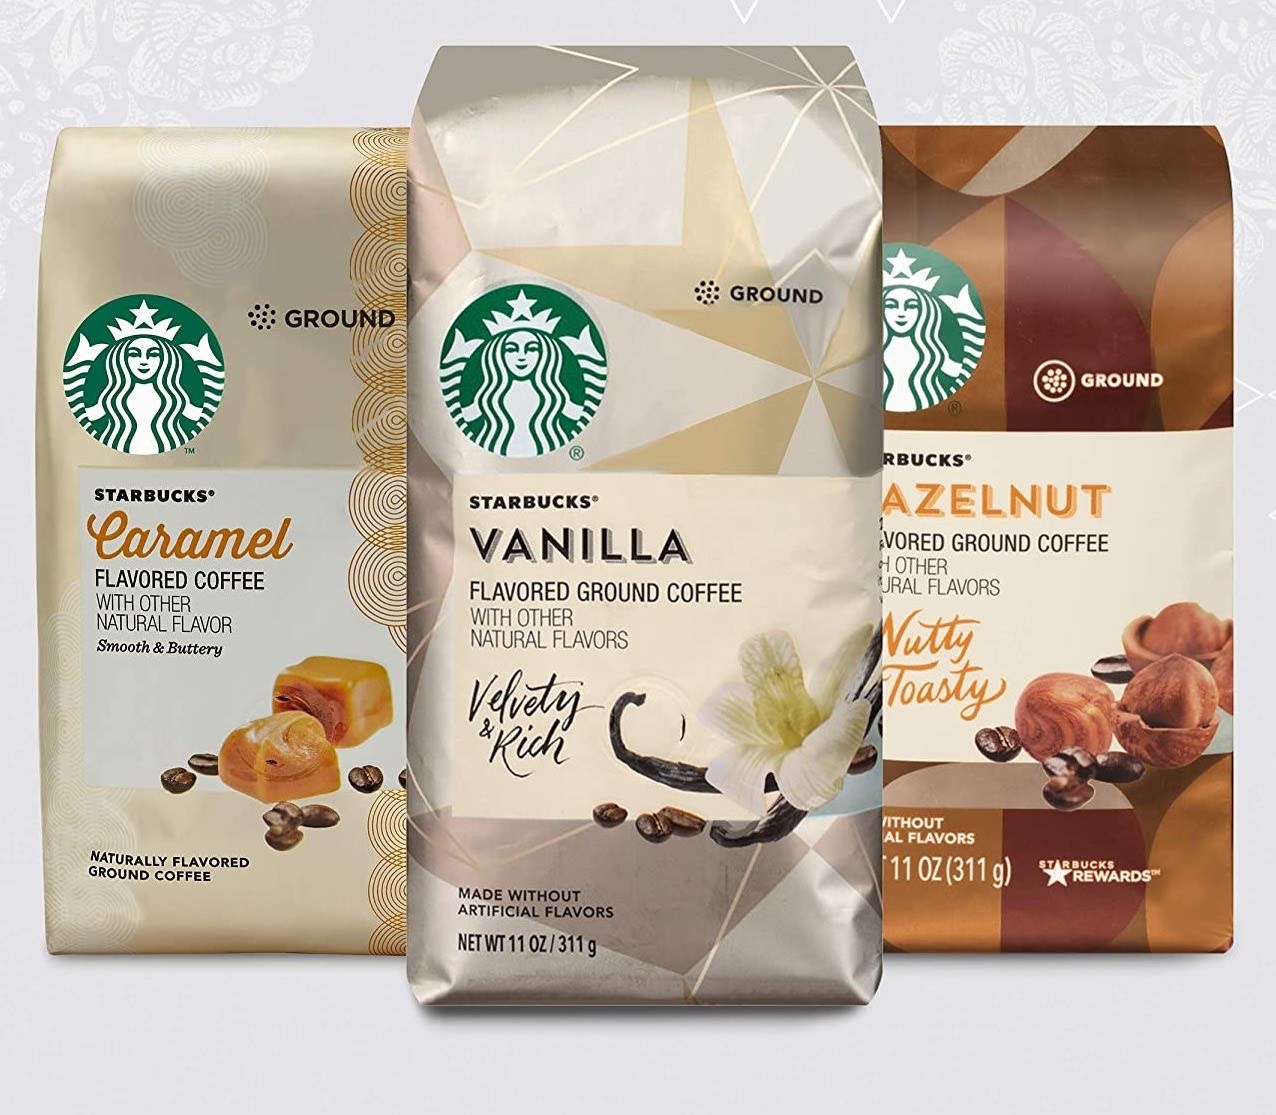 The three flavors of Starbucks coffees in their packaging